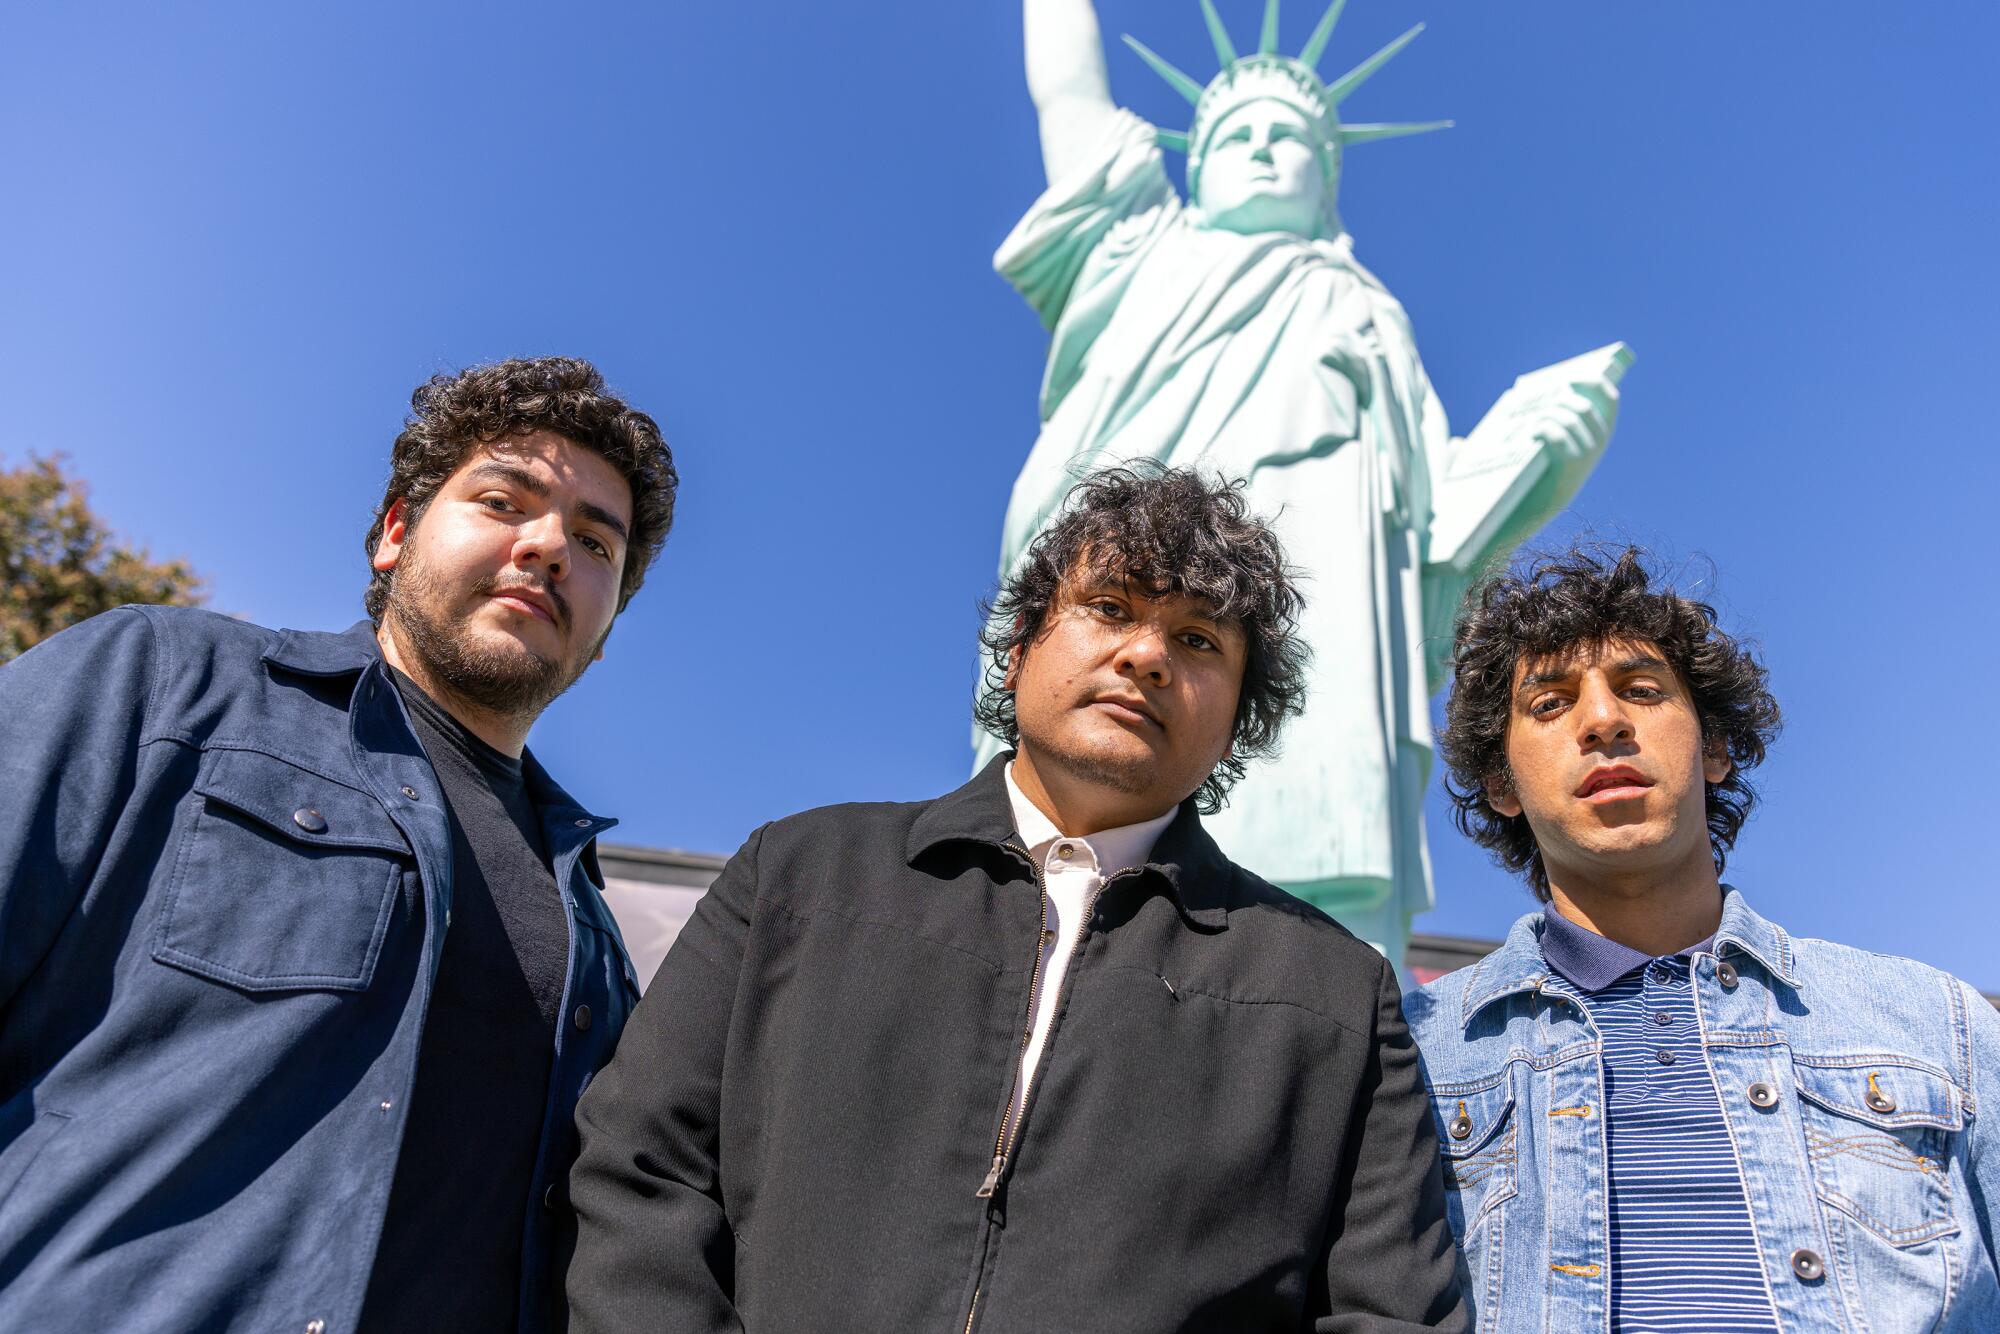 From left, Patrick Juarez, Henry Vargas, and Jose Corona pose in front of the Statue of Liberty Replica in El Monte.